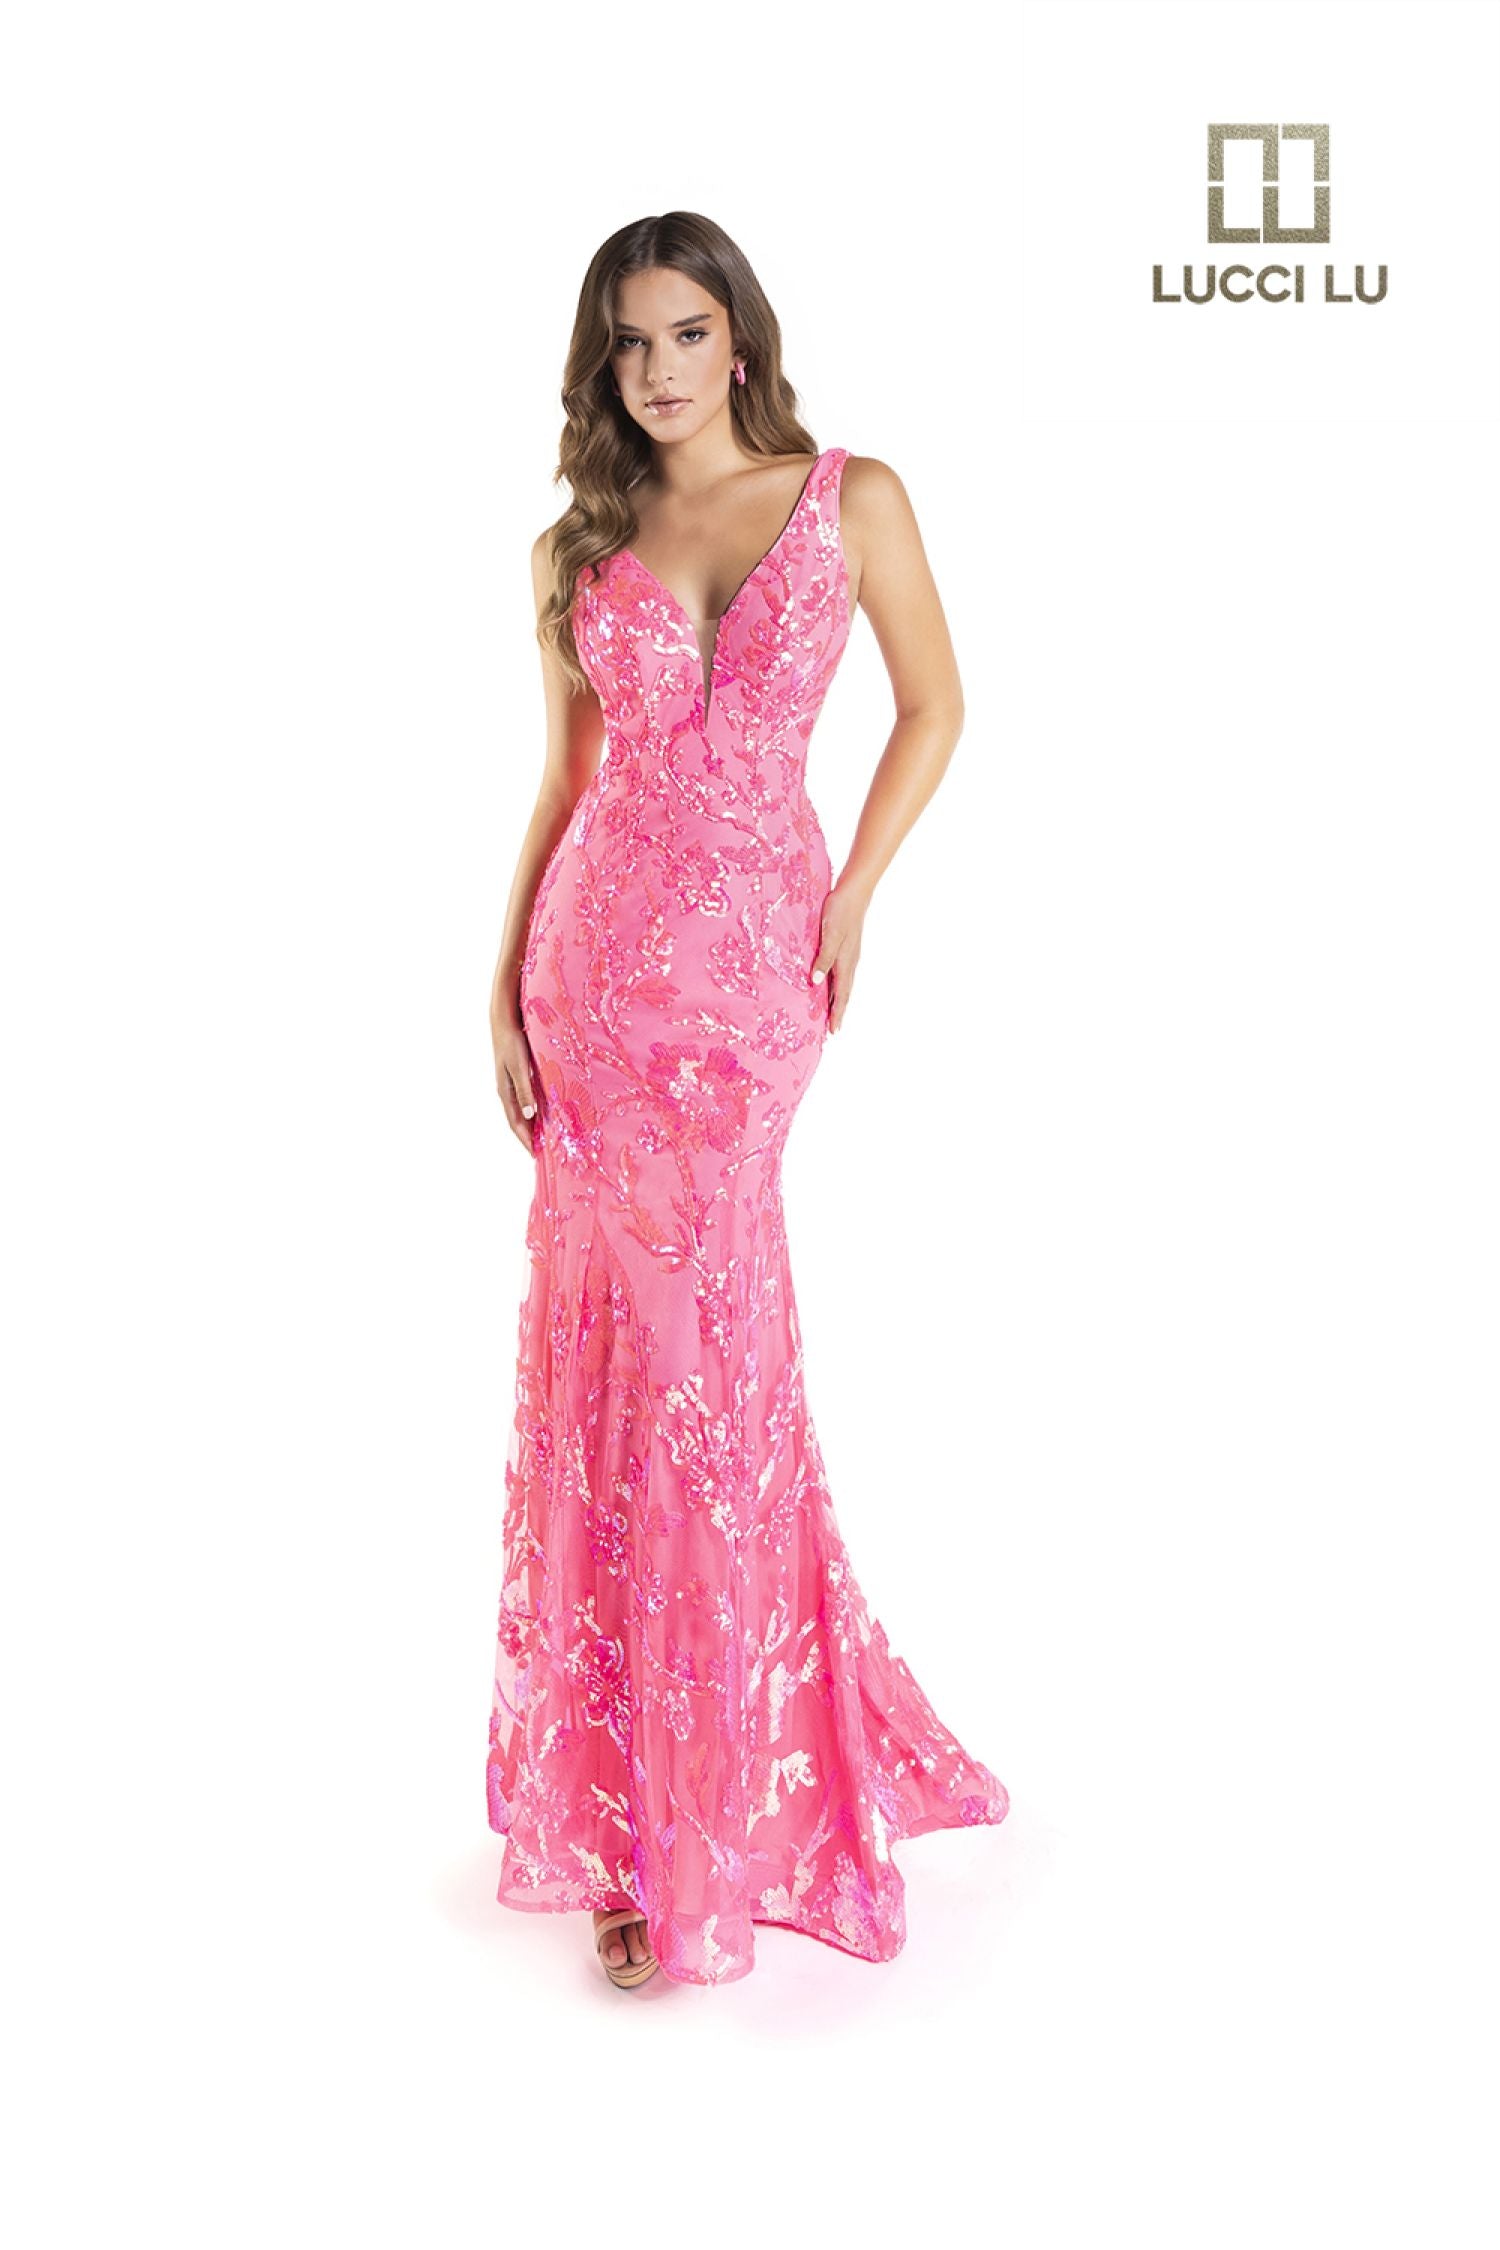 Lucci Lu 1230 Long Fitted Sequin Neon Prom Dress V Neck Formal Pageant Gown Backless  Sizes: 00-24  Colors: Neon Orange, Neon Pink, Neon Yellow